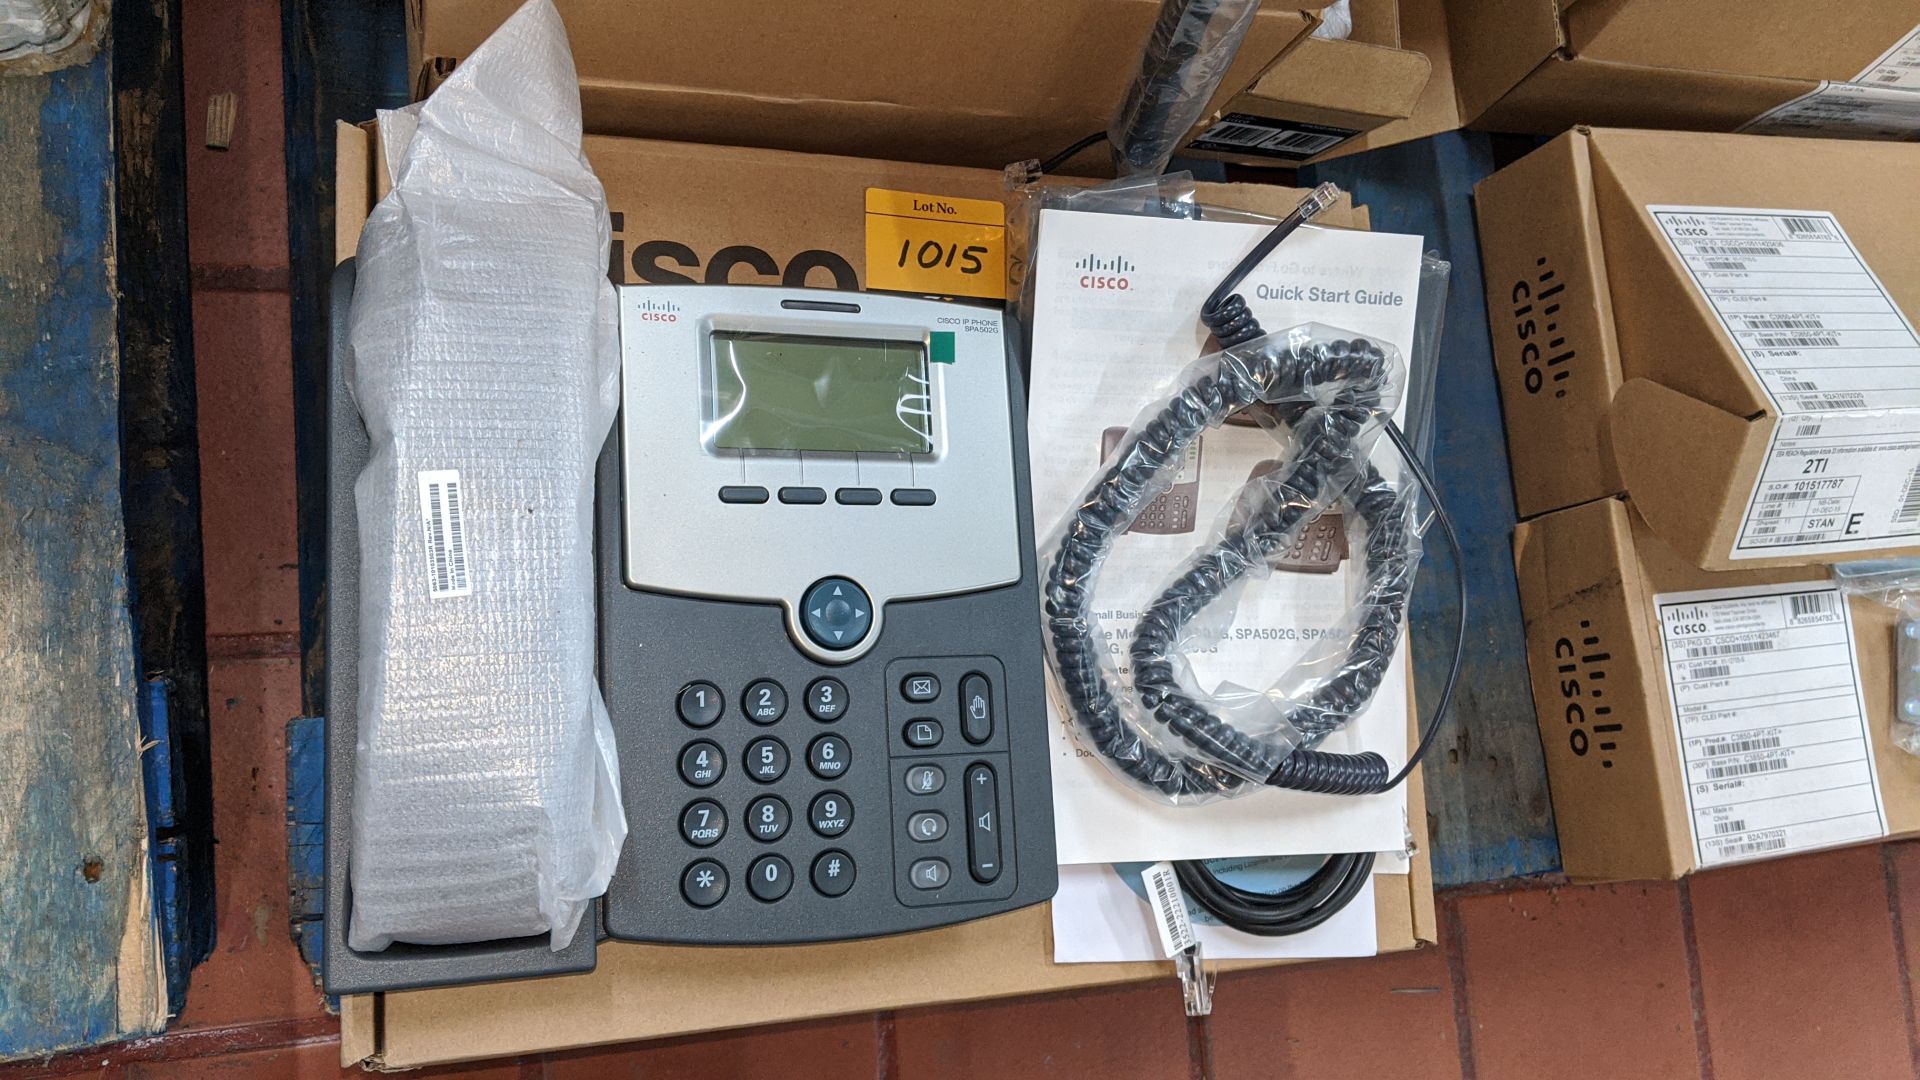 Cisco IP phone model SPA502G. This is one of a large number of lots in this sale being sold for